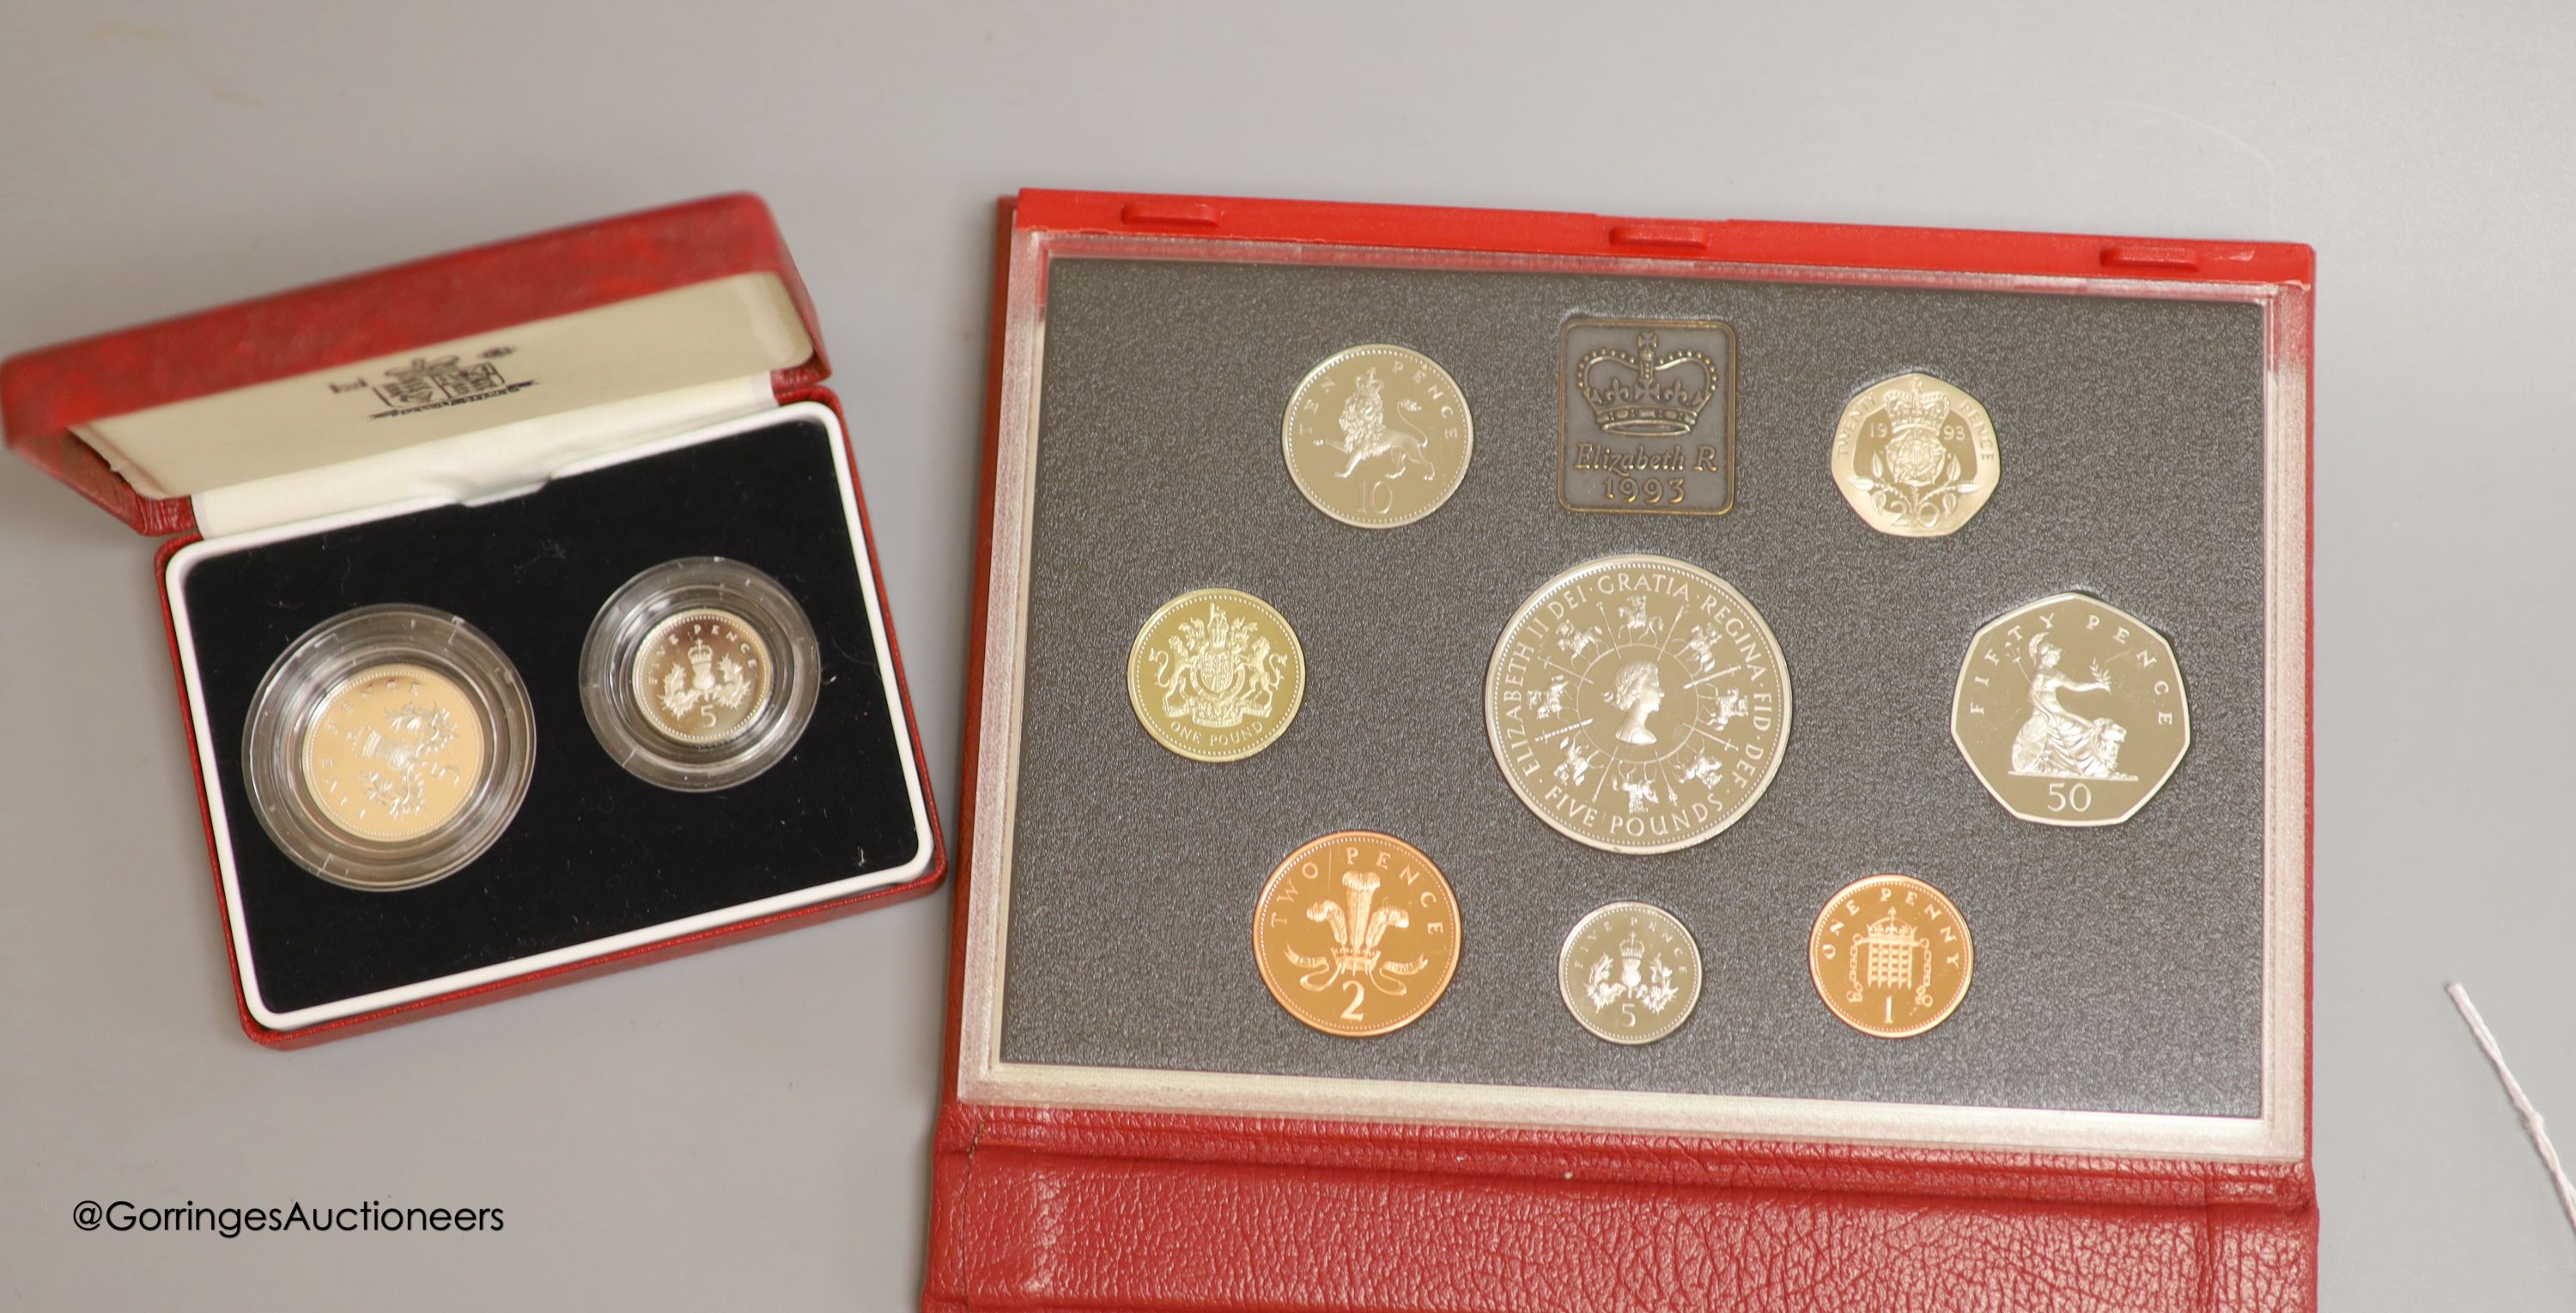 A Royal Mint UK 1993 proof coin collection set and a 1990 silver proof five pence 2 coin set